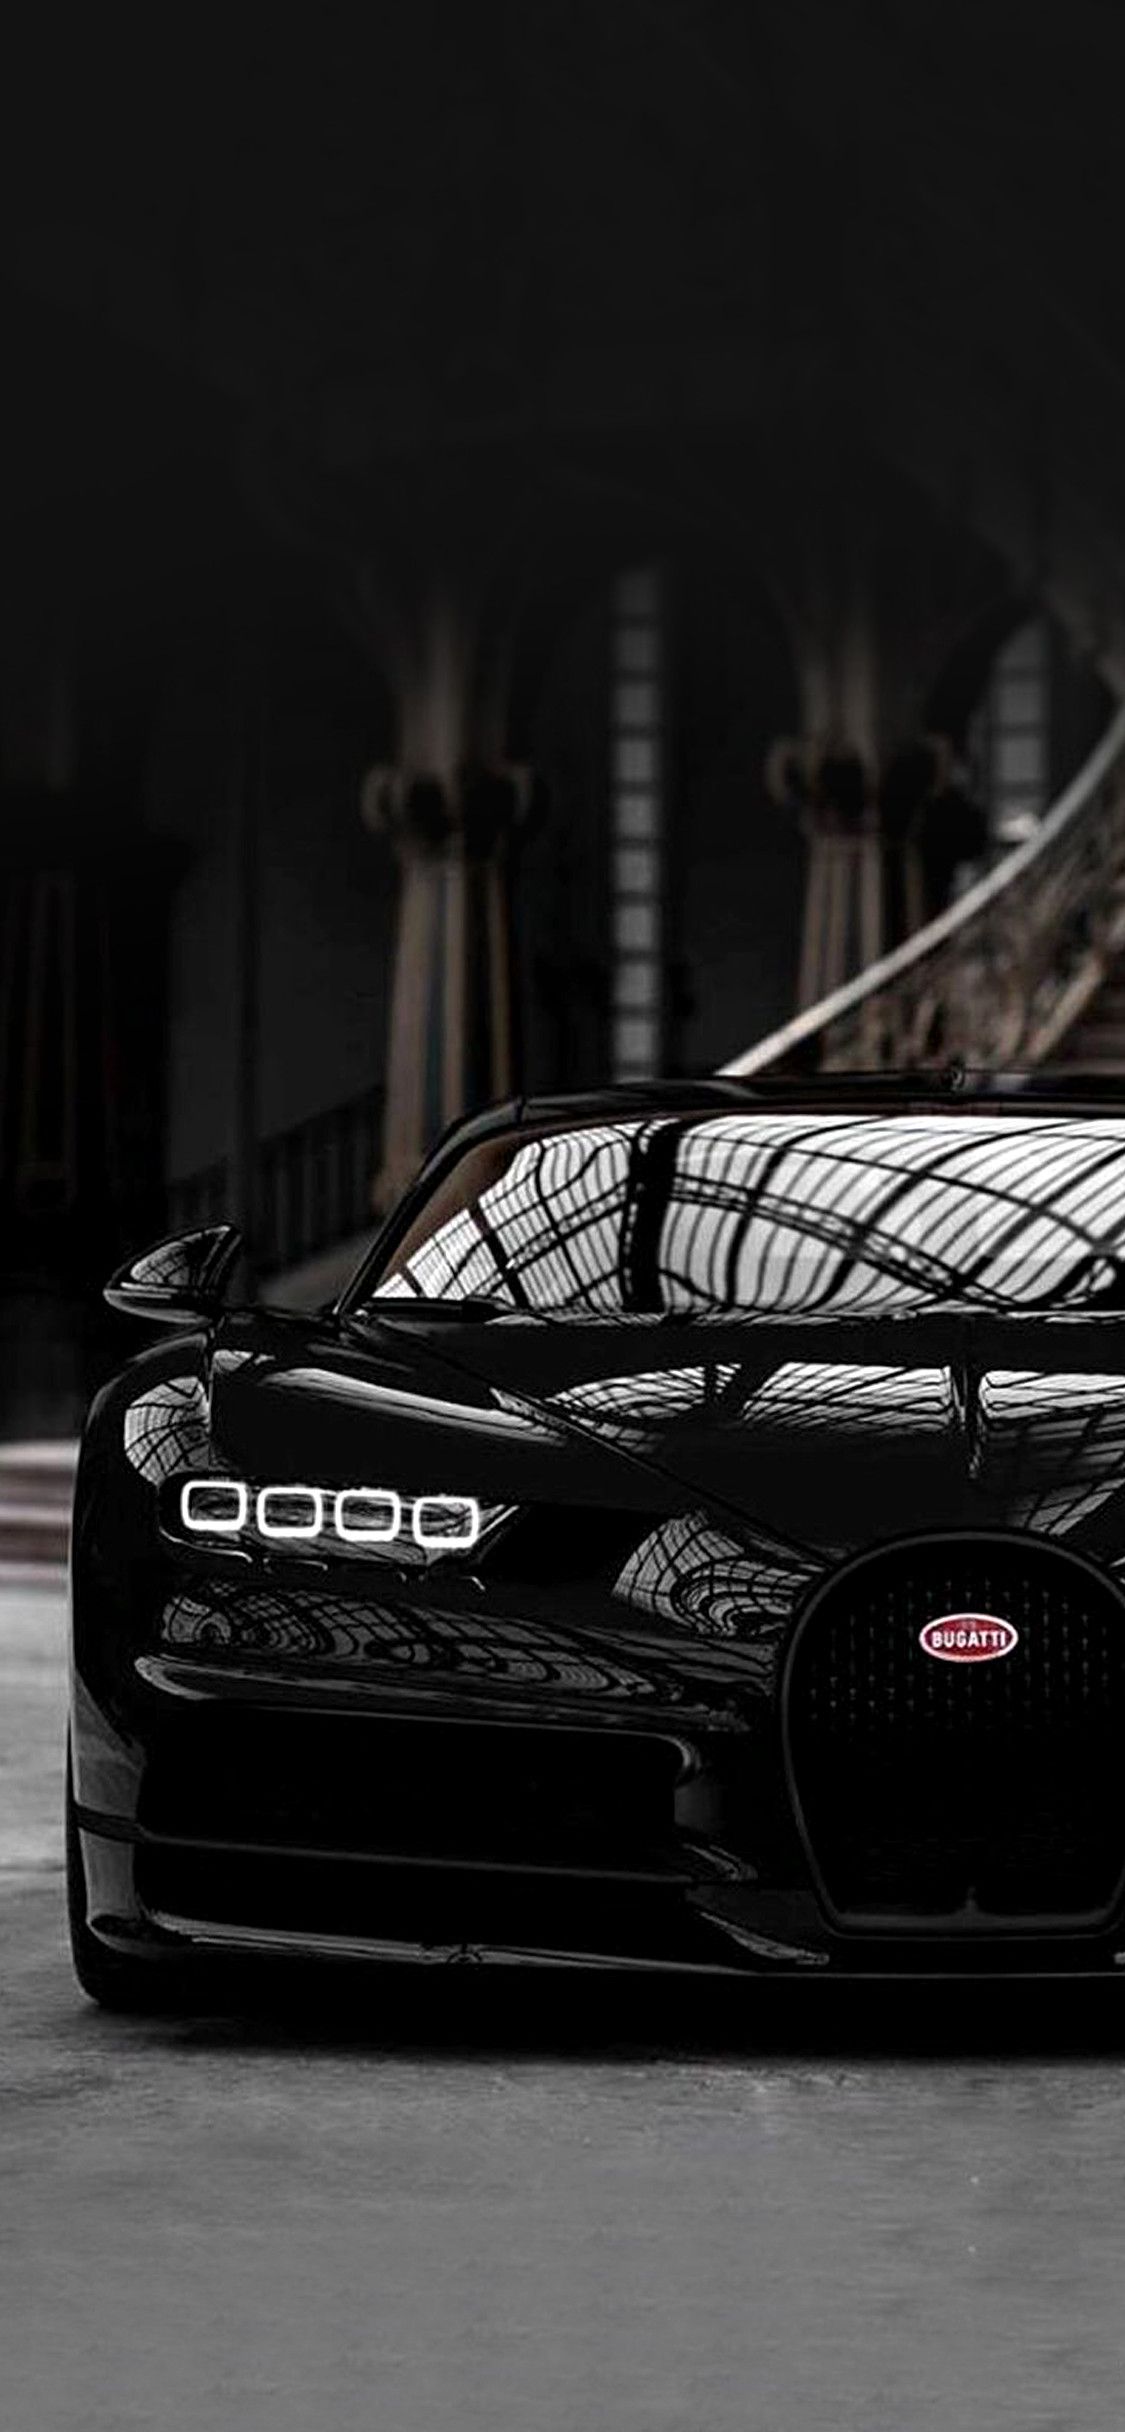 Black And White Cars Wallpapers - Wallpaper Cave